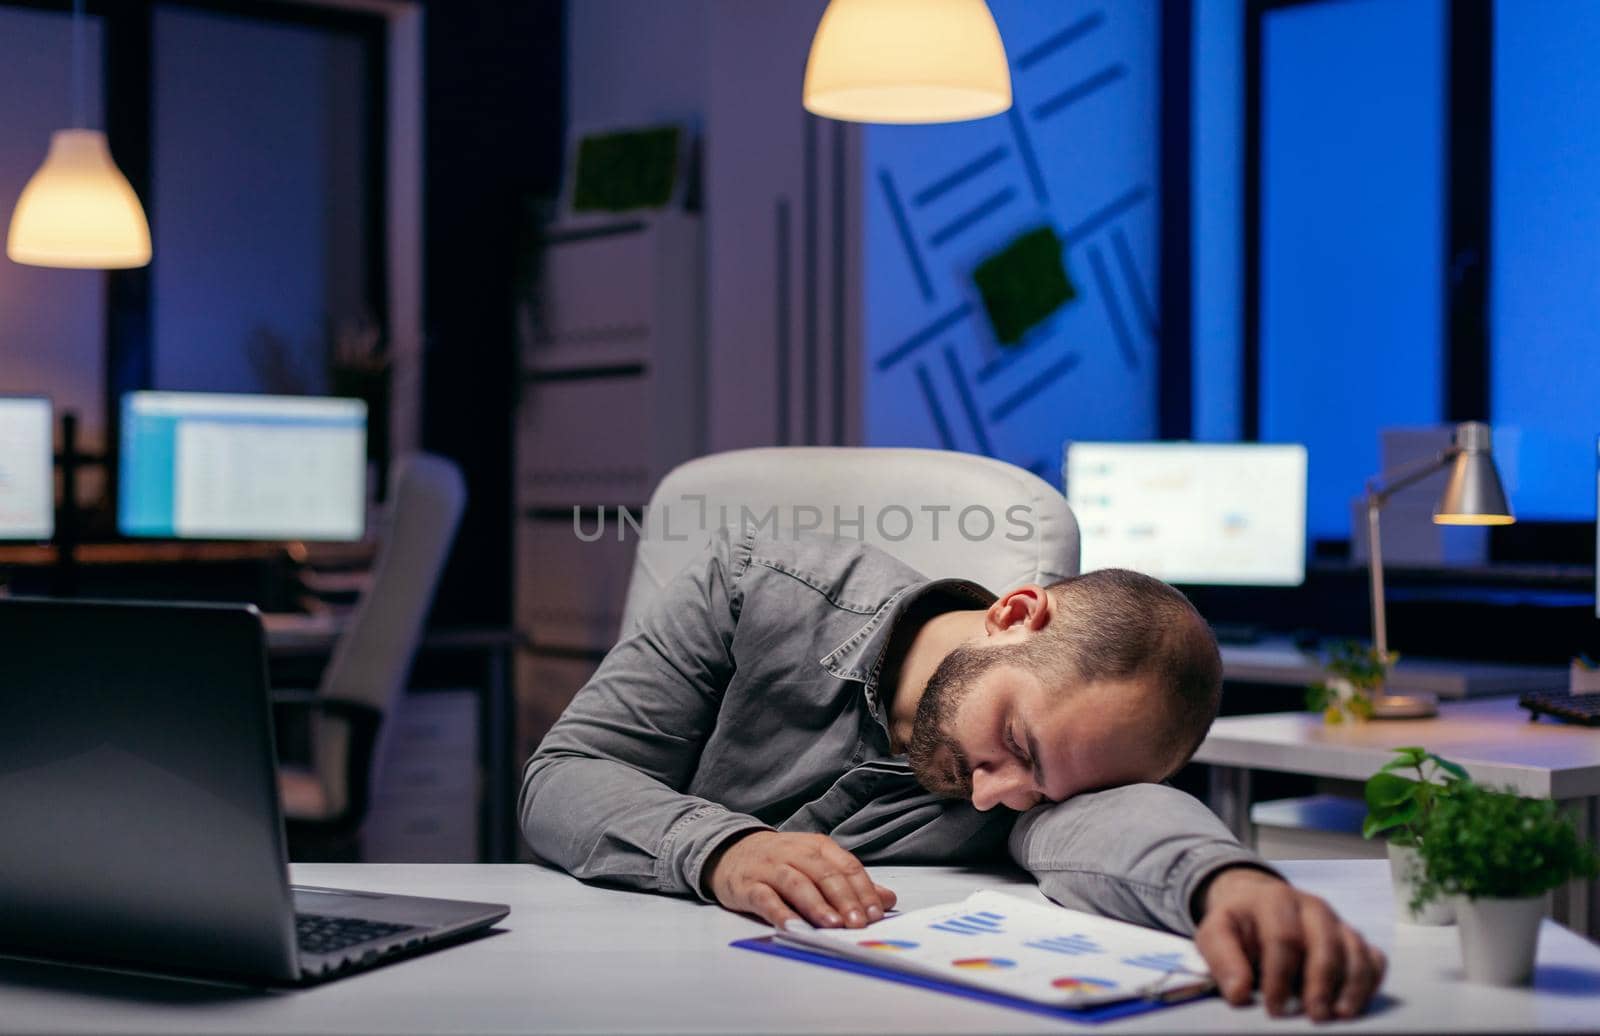 Tired businessman sleeping in his workplace on desk. Workaholic employee falling asleep because of while working late at night alone in the office for important company project.